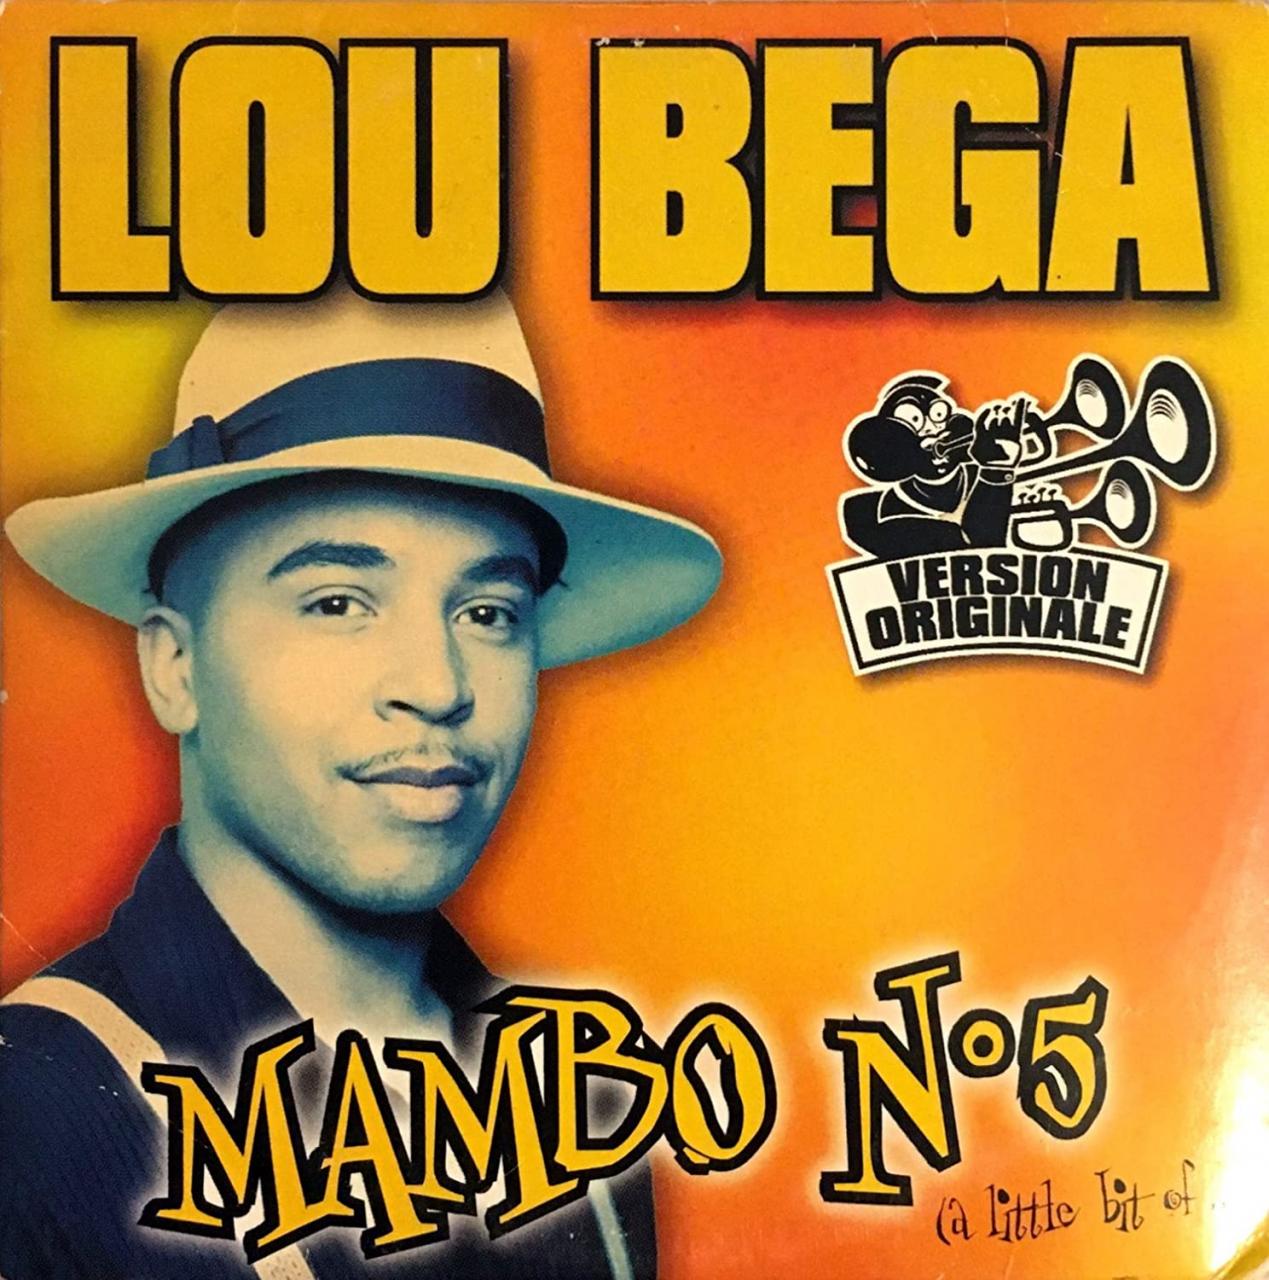 Lou Bega - Mambo No. 5 (A Little Bit of...) mp3 download